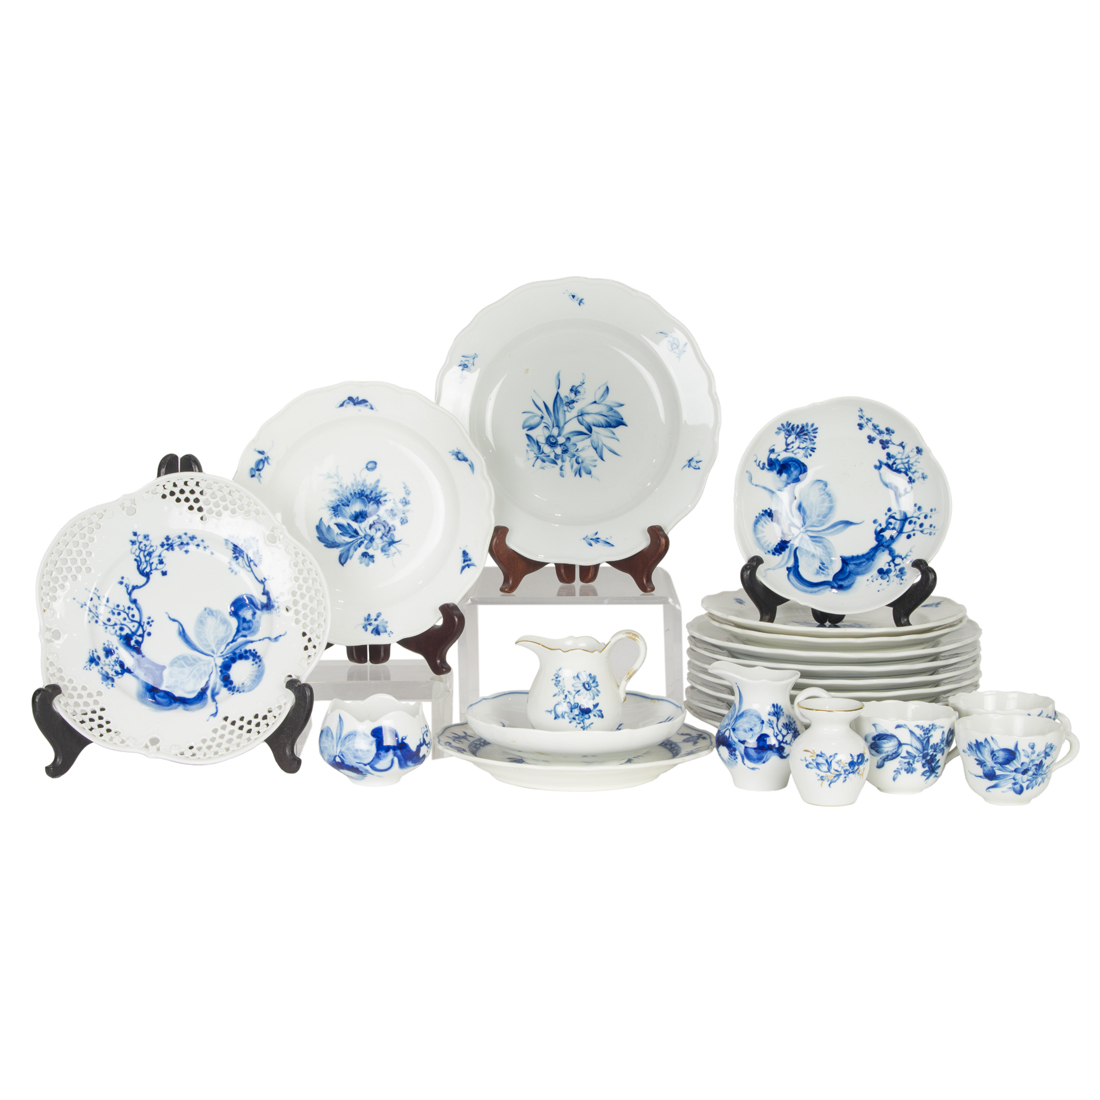 A GROUP OF MEISSEN BLUE AND WHITE 3cdbe6